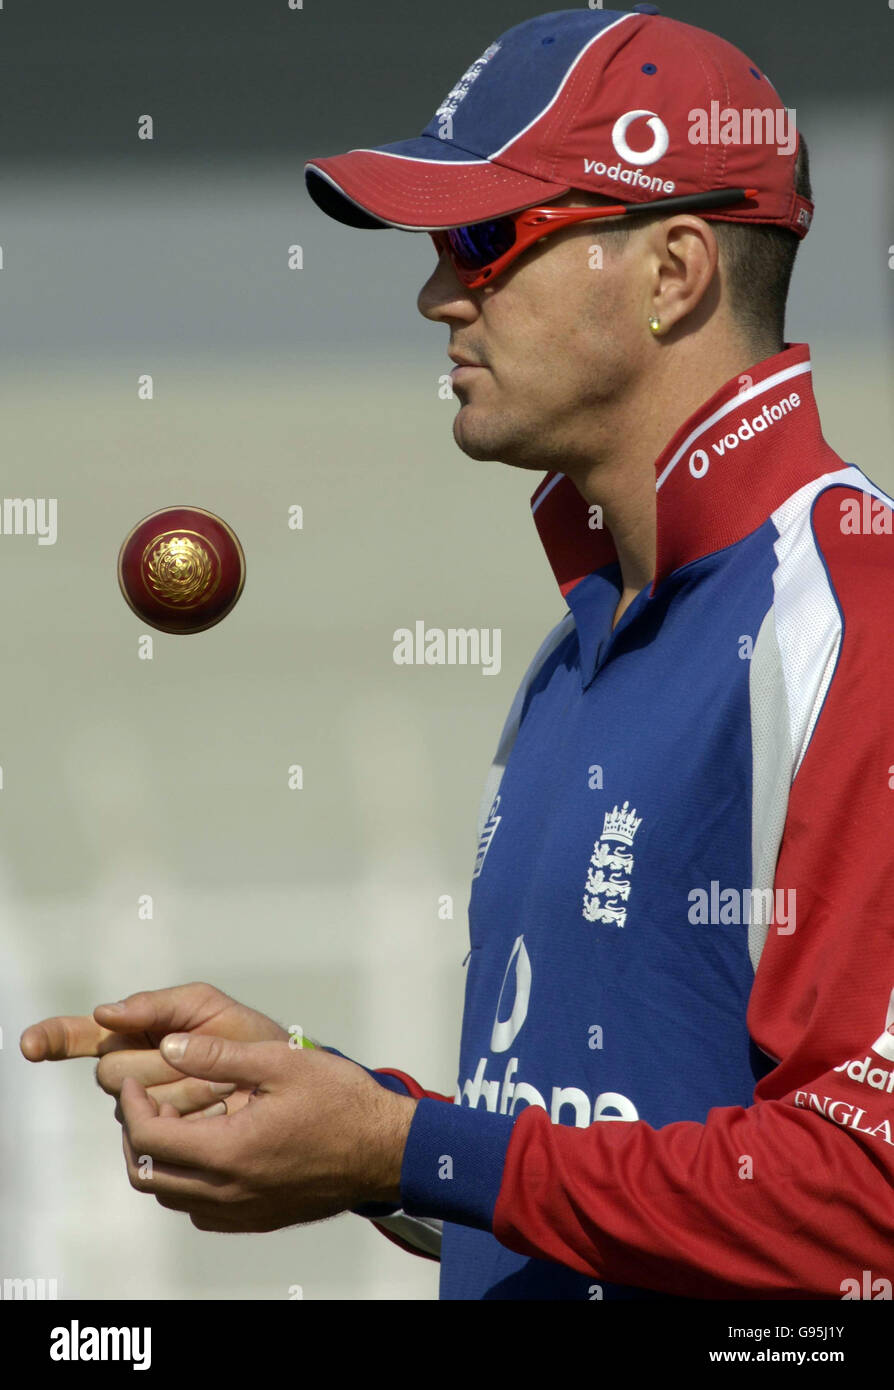 England cricketer Kevin Pietersen sporting a new haircut during net practice at the Cricket Club of India, Brabourne Stadium, Bombay, India, Friday February 17, 2006. PRESS ASSOCIATION Photo. Photo credit should read: Rebecca Naden/PA. Stock Photo